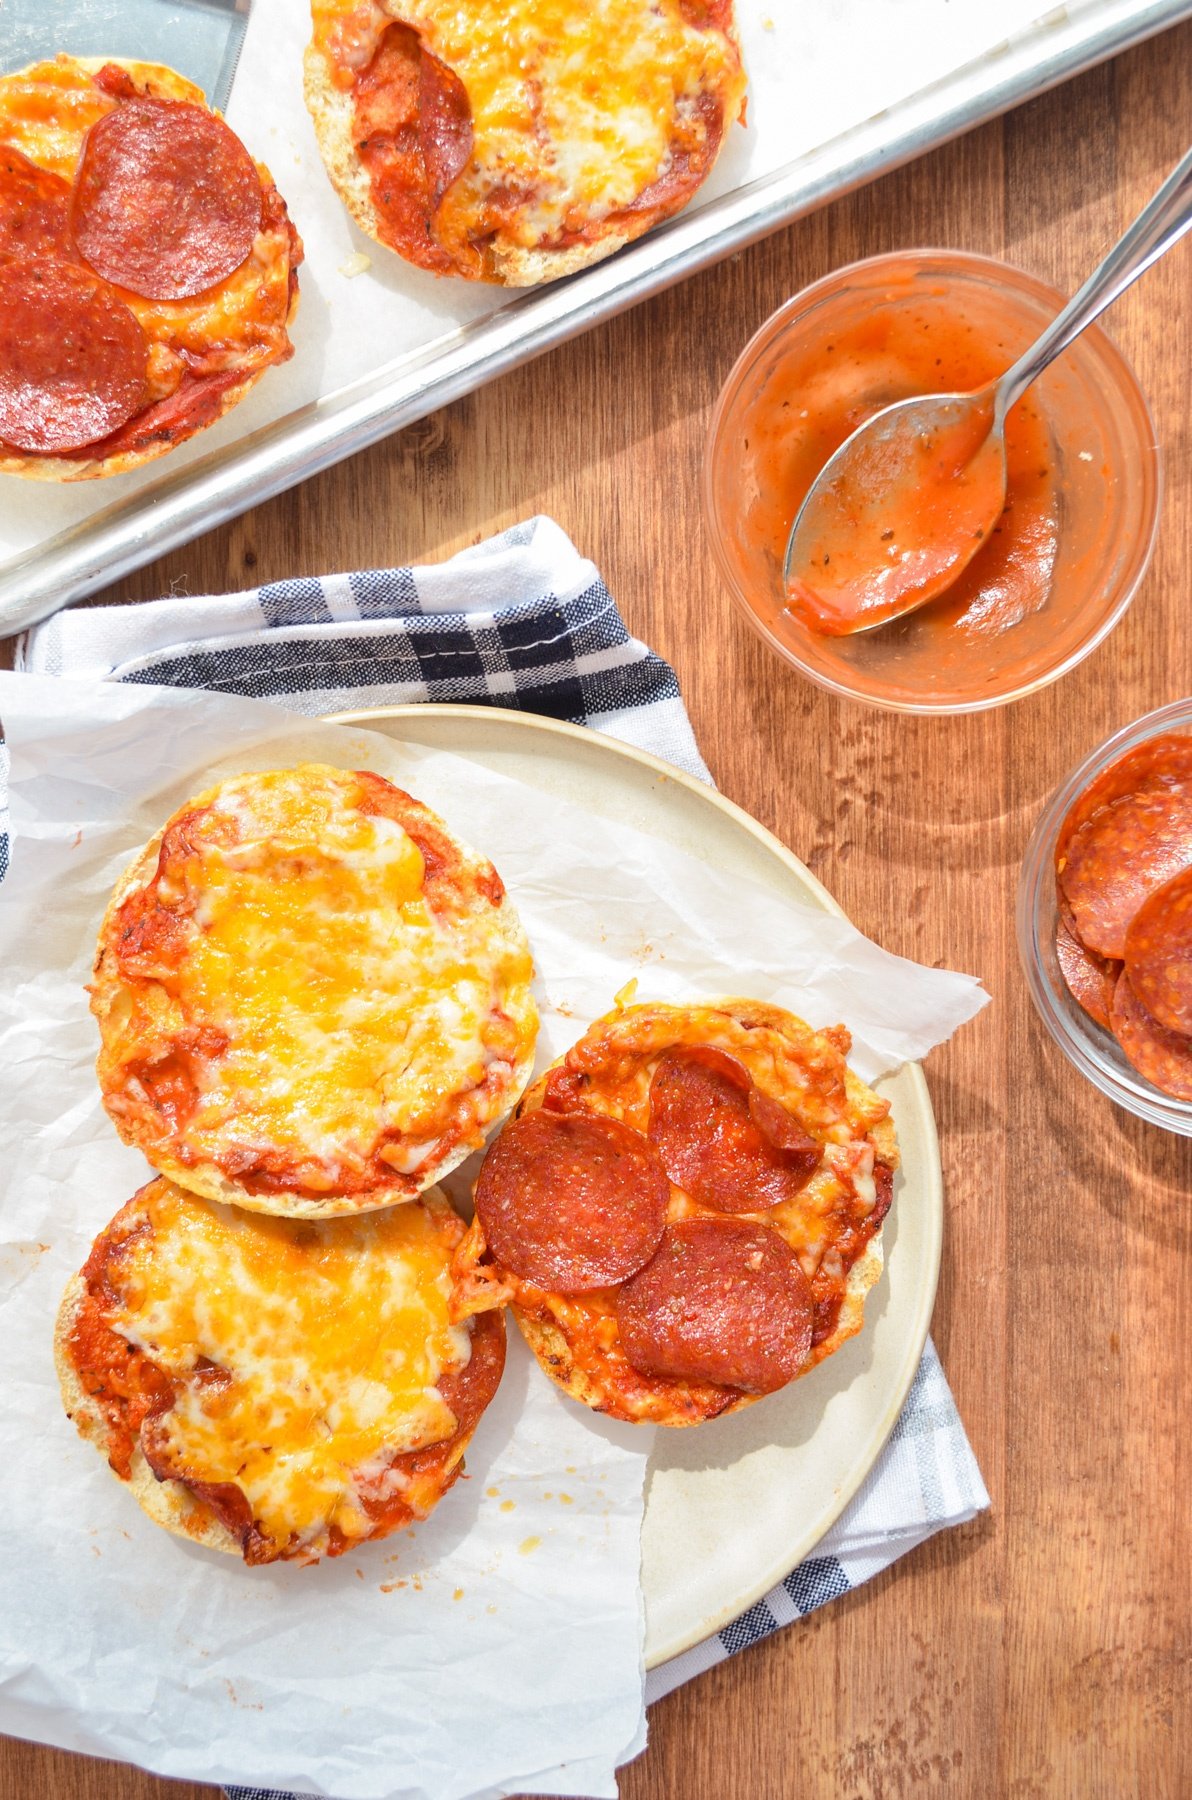 English muffin pizzas on a plate, with pizza sauce on the side.